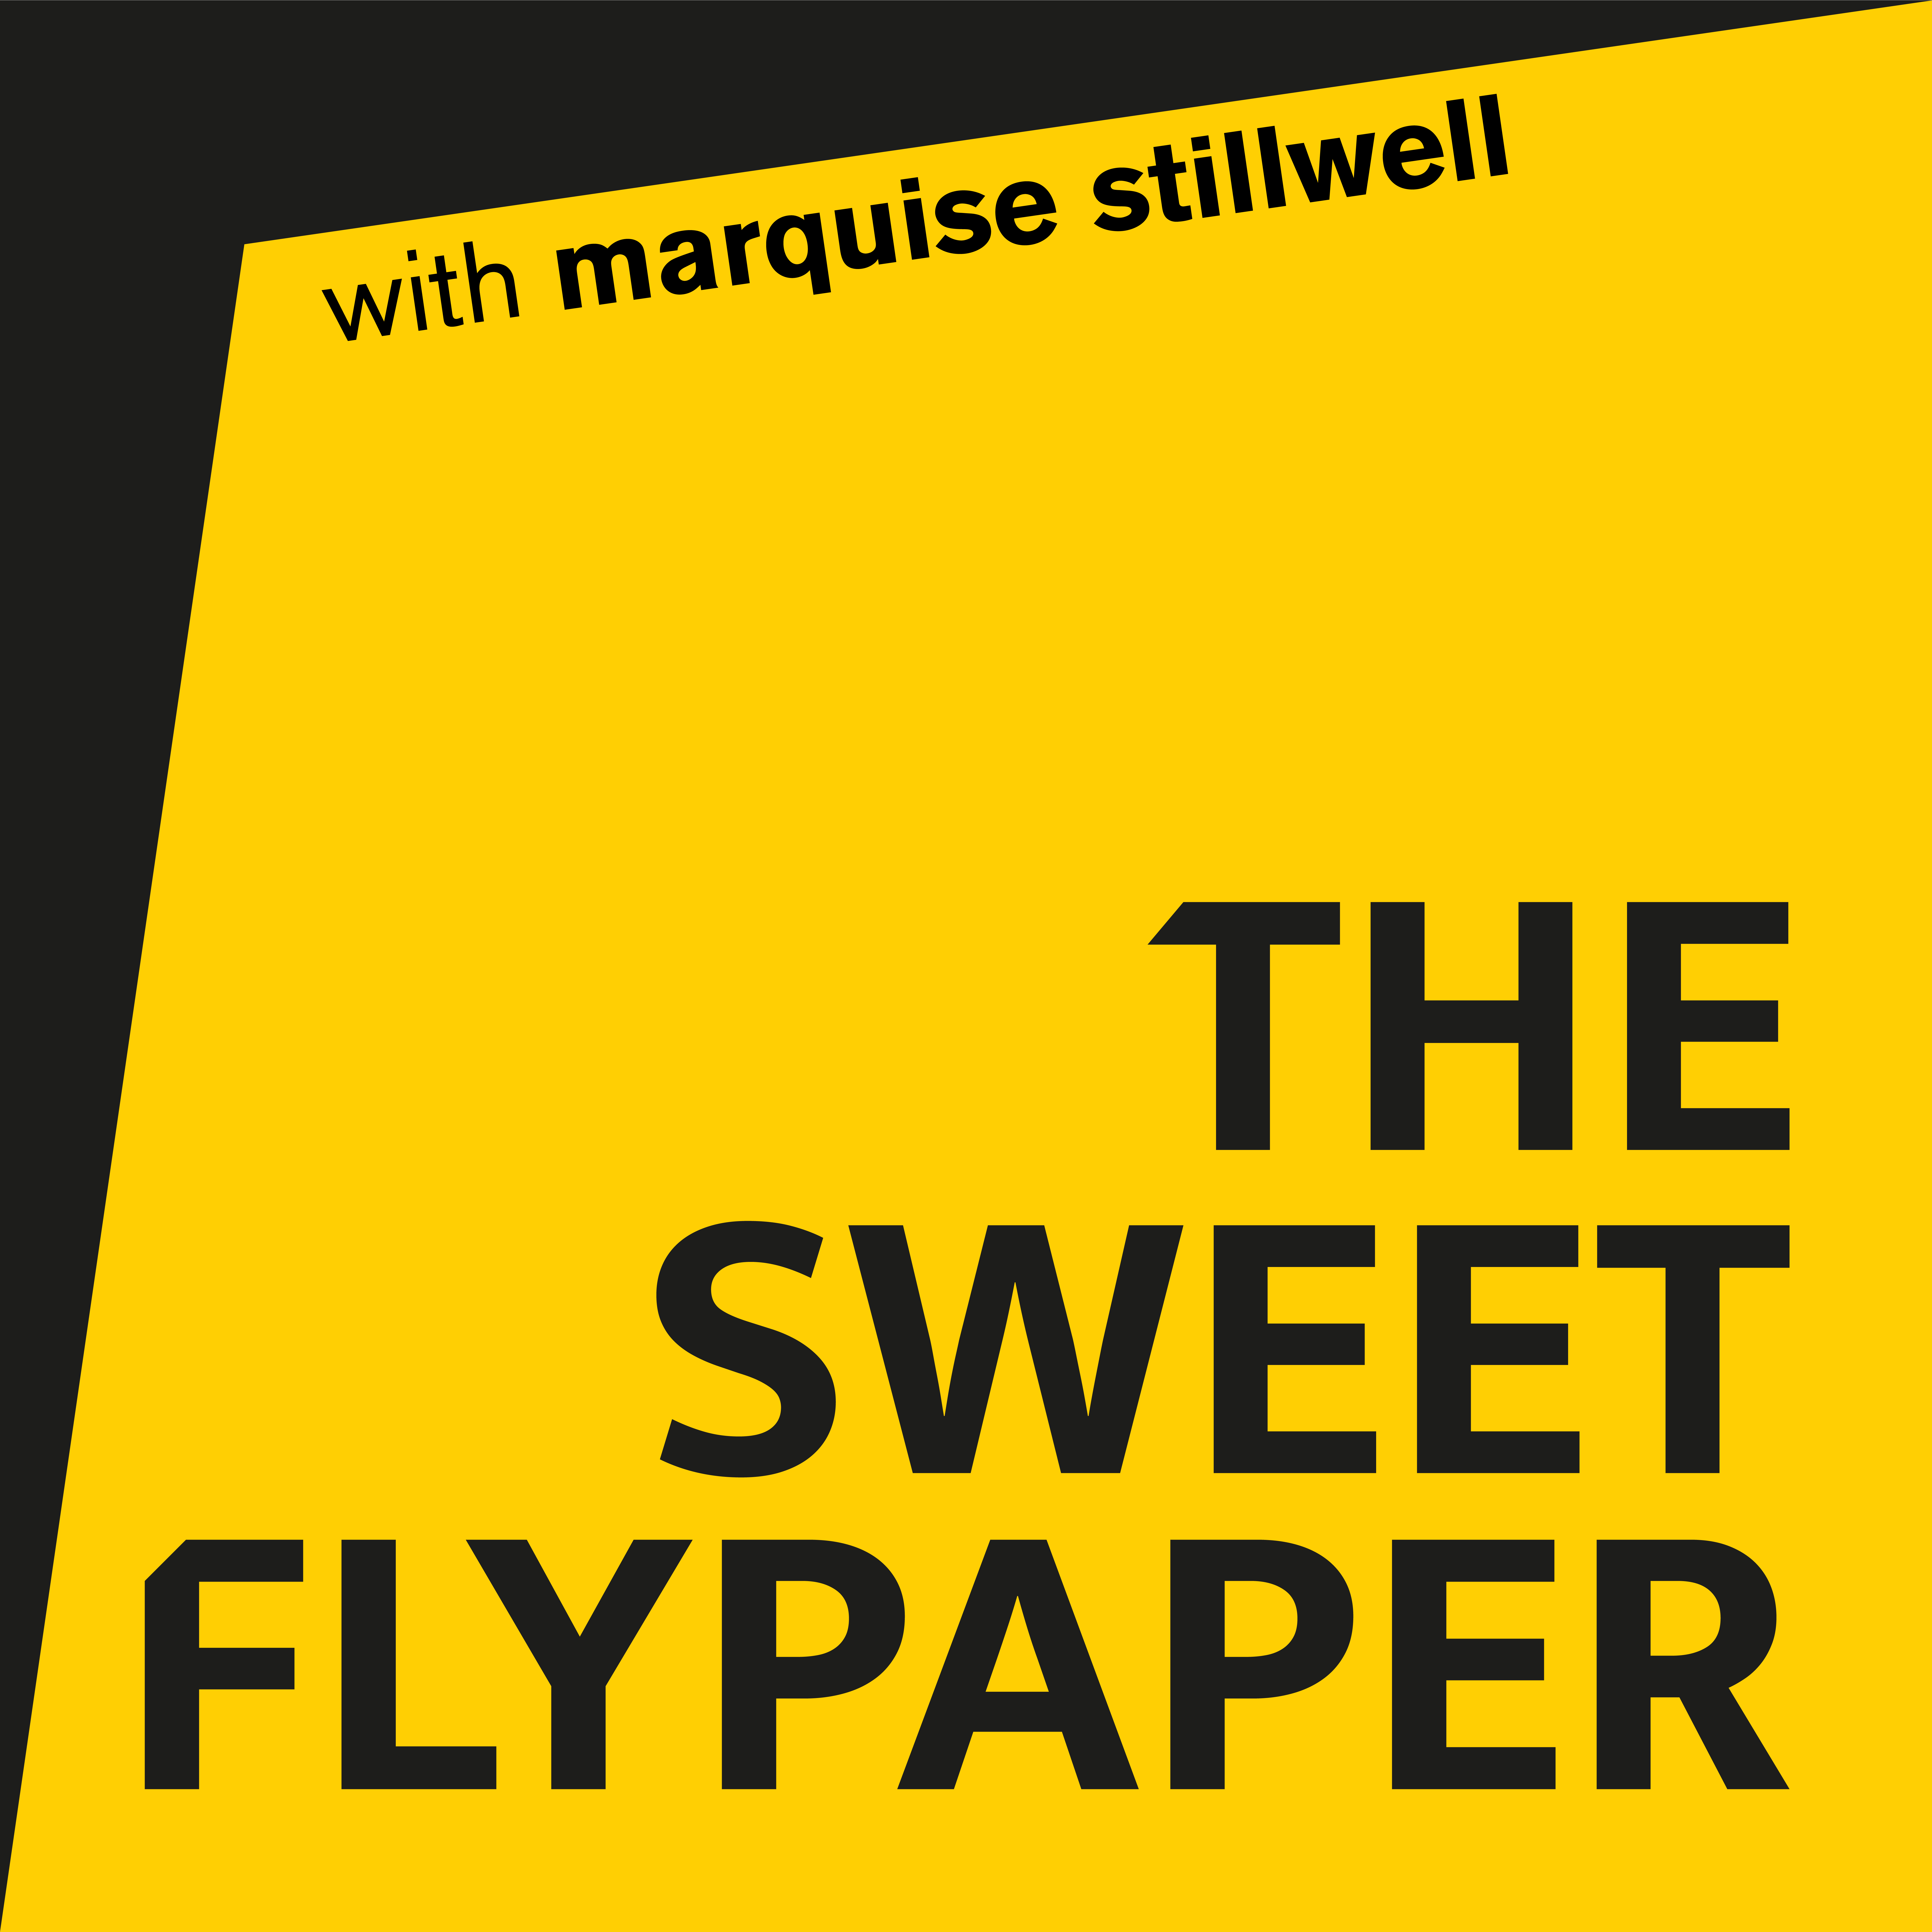 Welcome to The Sweet Flypaper